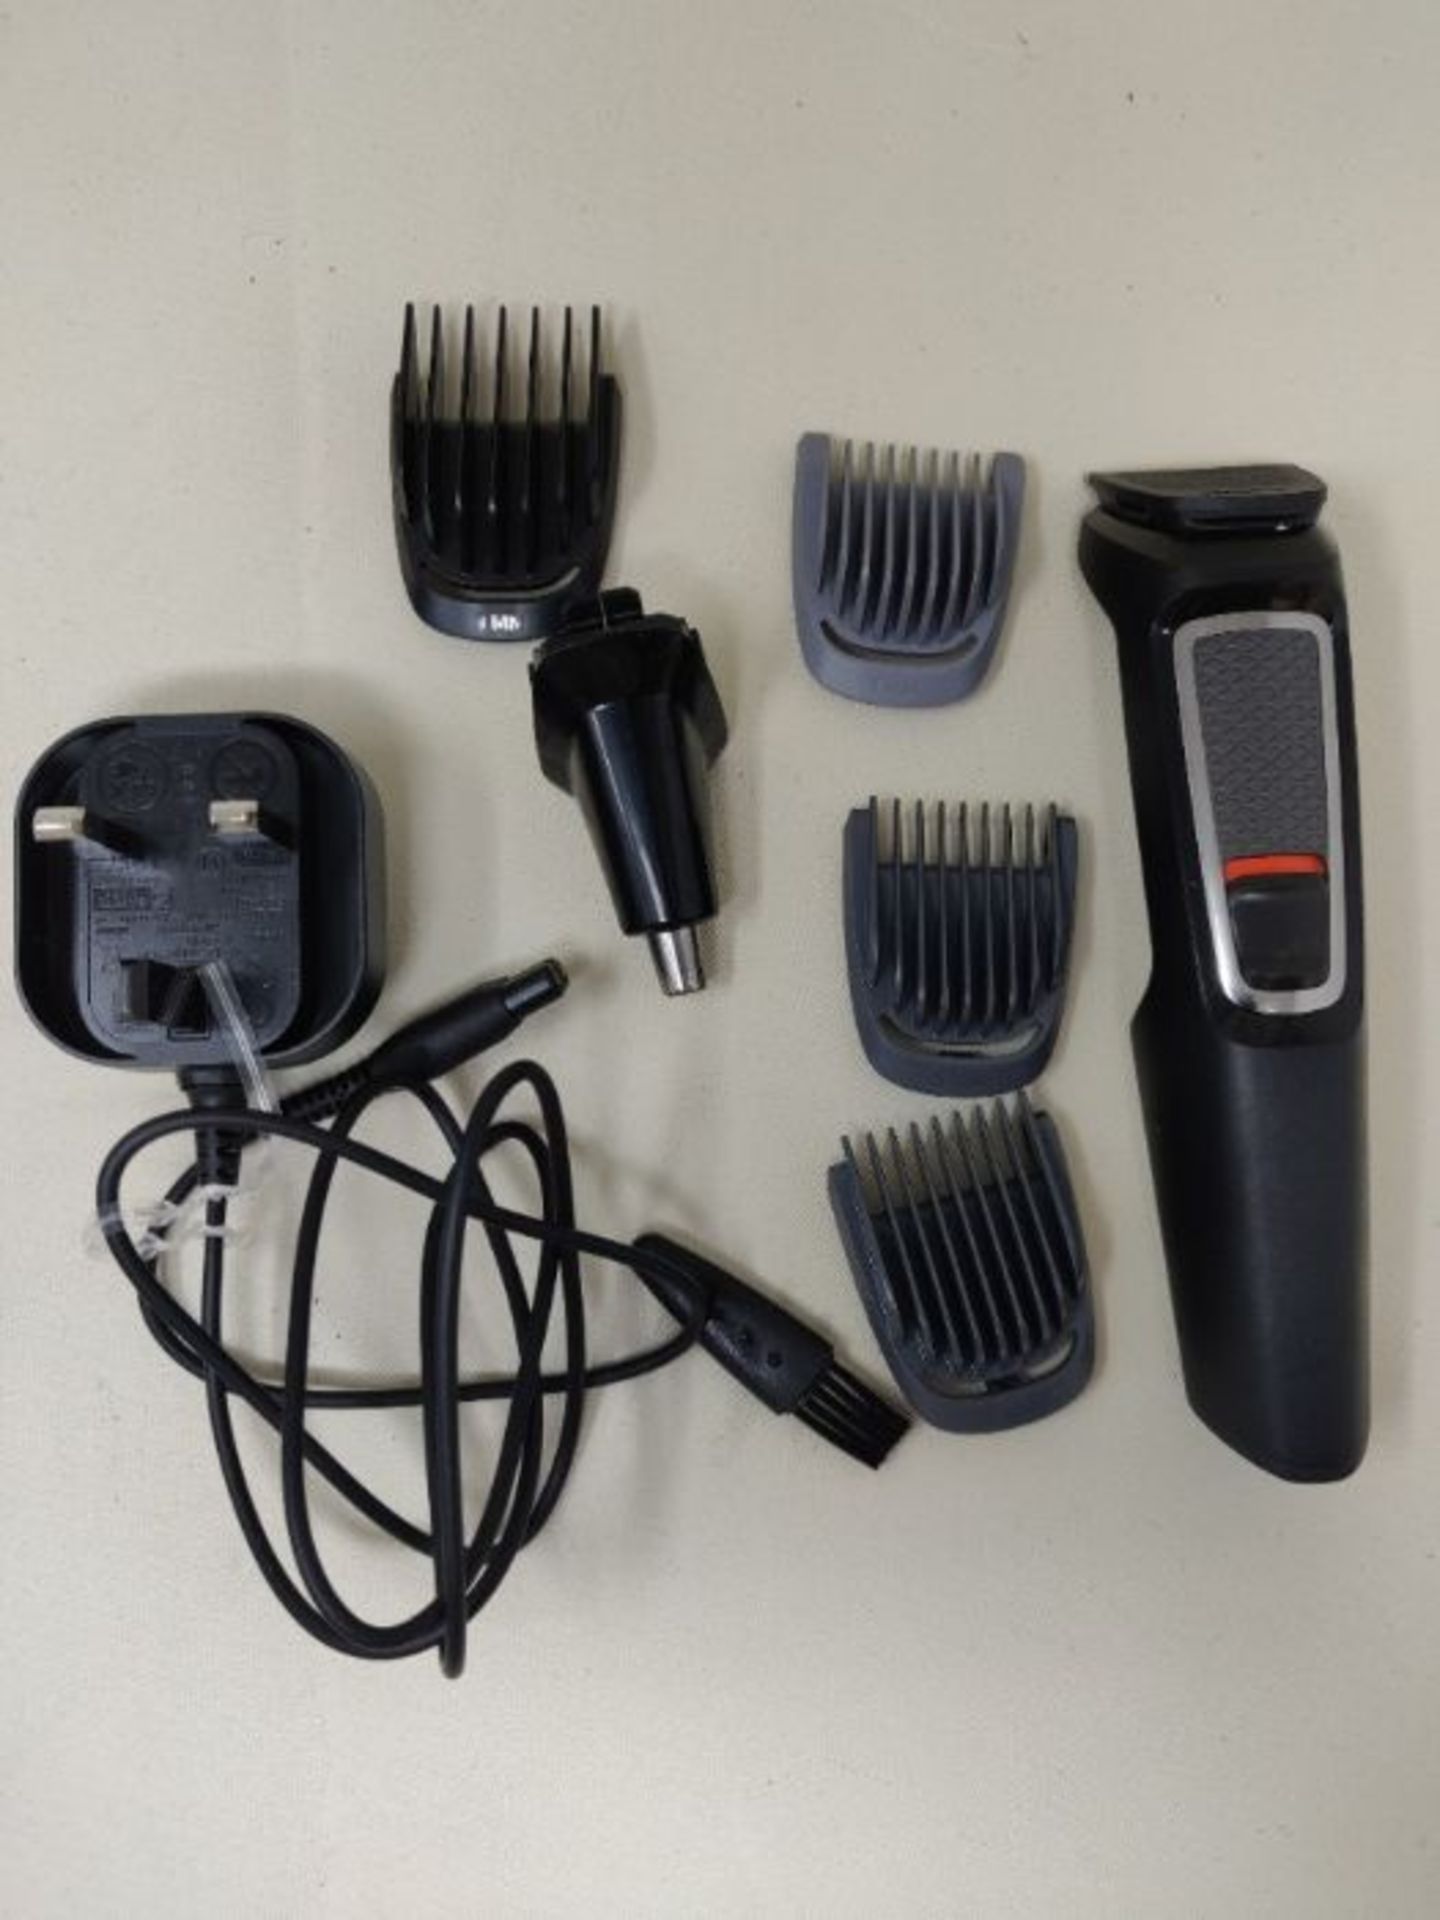 Philips 7-in-1 All-In-One Trimmer, Series 3000 Grooming Kit for Beard & Hair with 7 At - Image 3 of 3